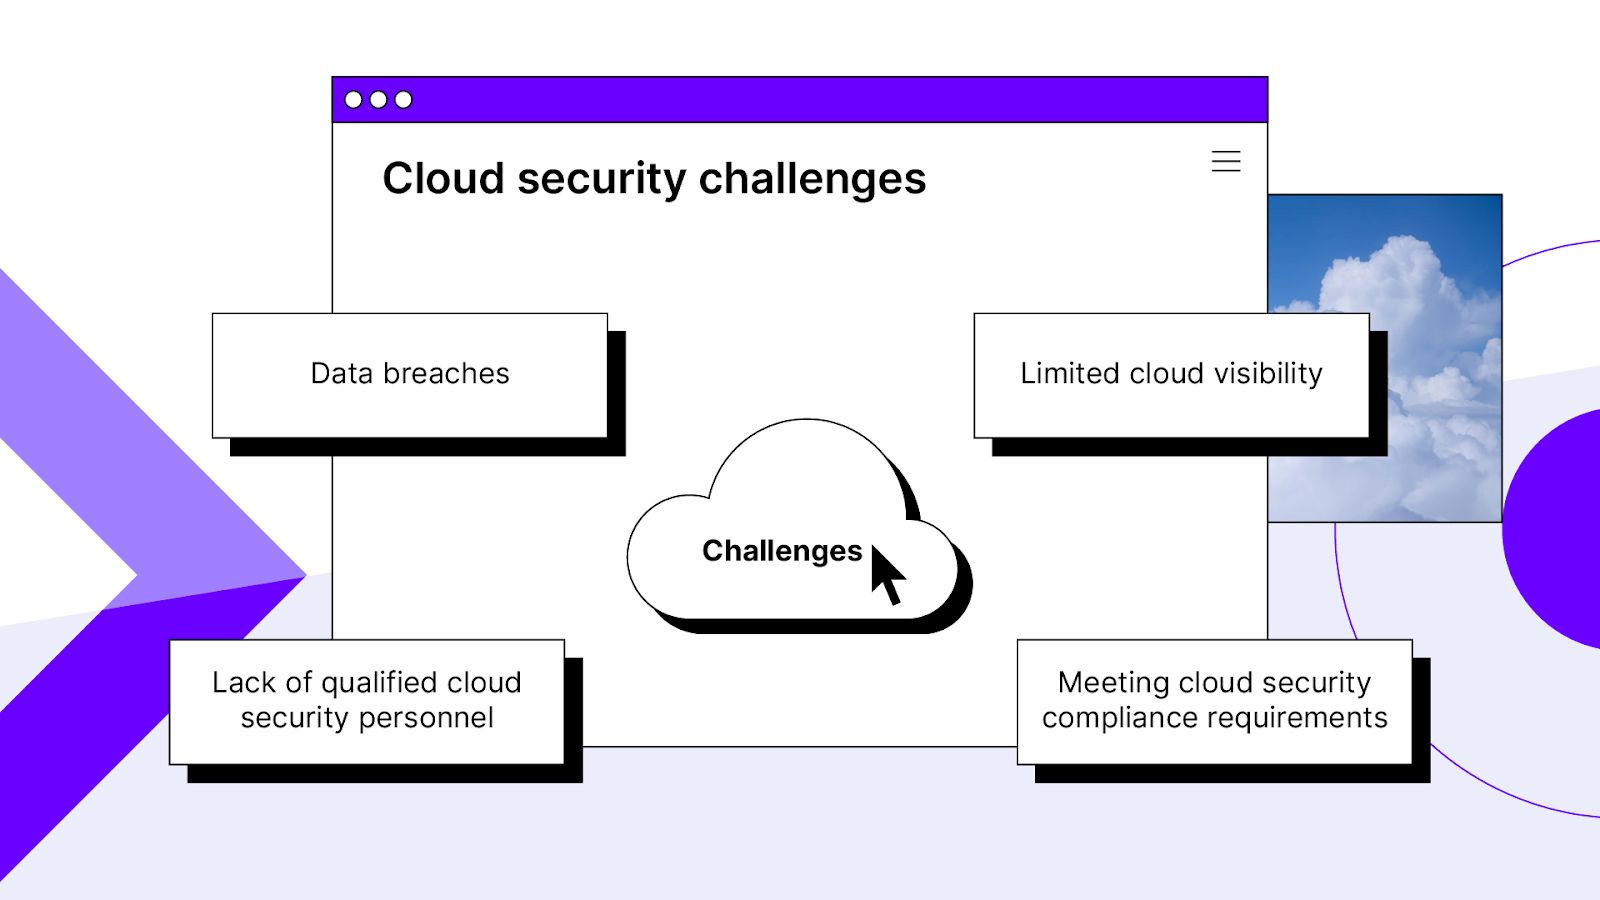 Cloud security challenges include data breaches and limited cloud visibility.